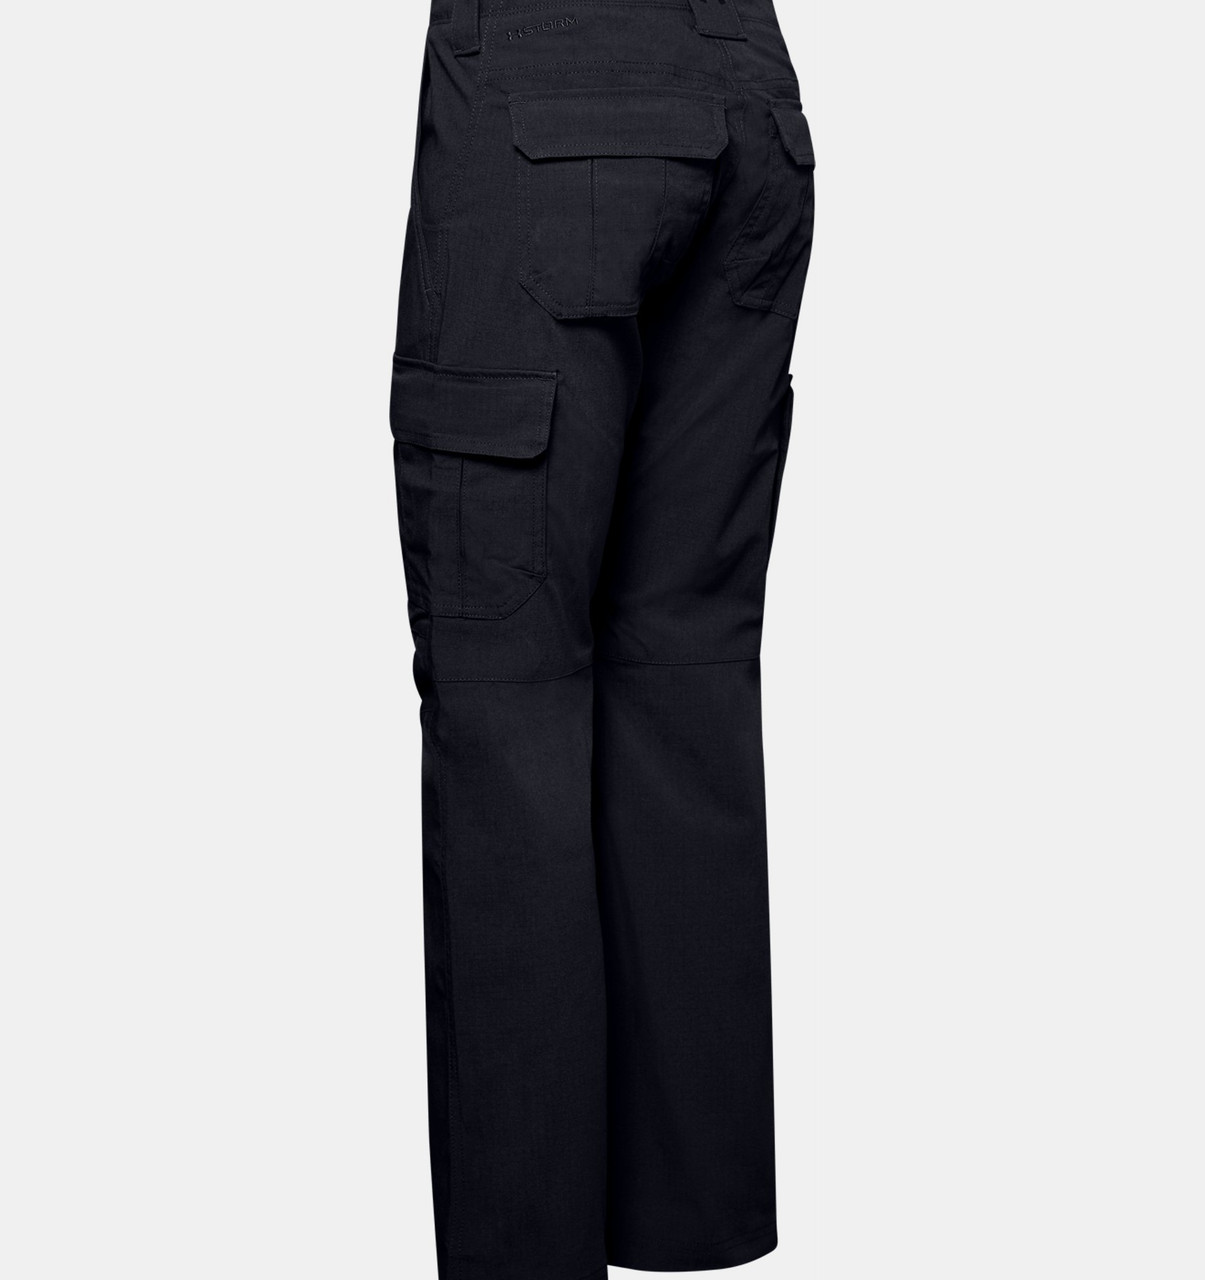 Under Armour Women's Tactical Patrol Pant - paddlepro